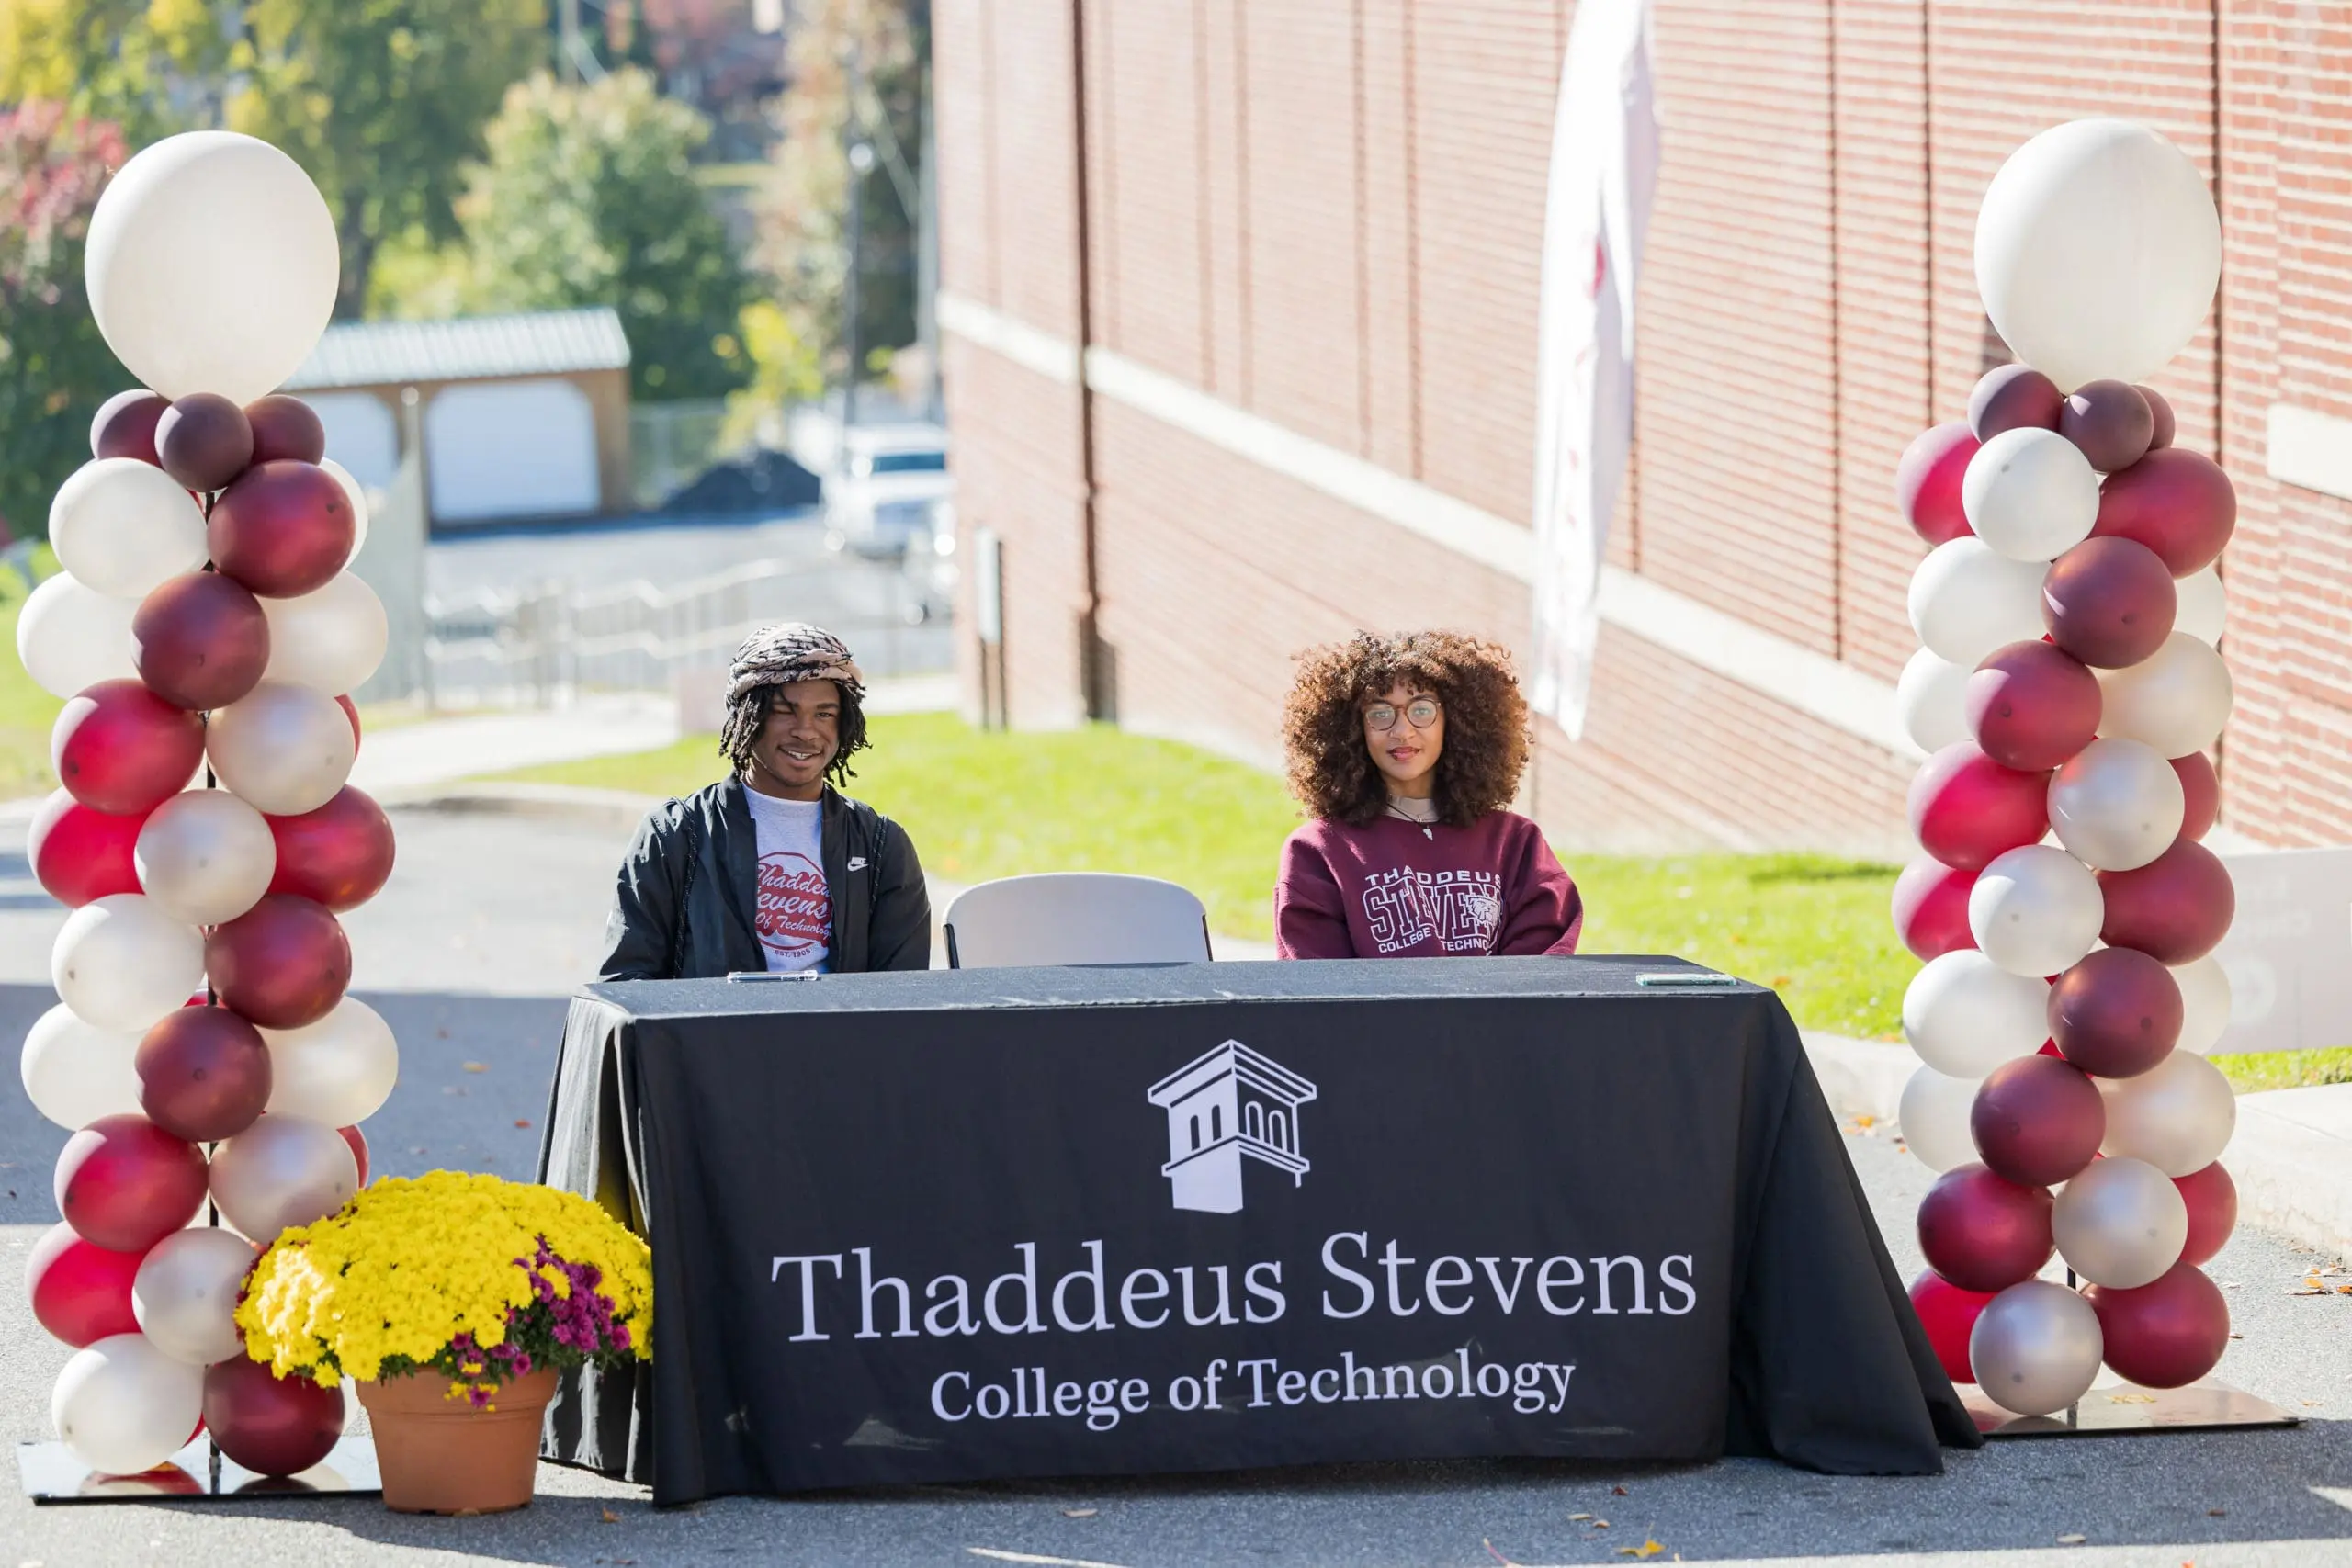 Thaddeus Stevens College students sitting and smiling at Thaddeus Stevens College of Technology table with balloons and flowers around